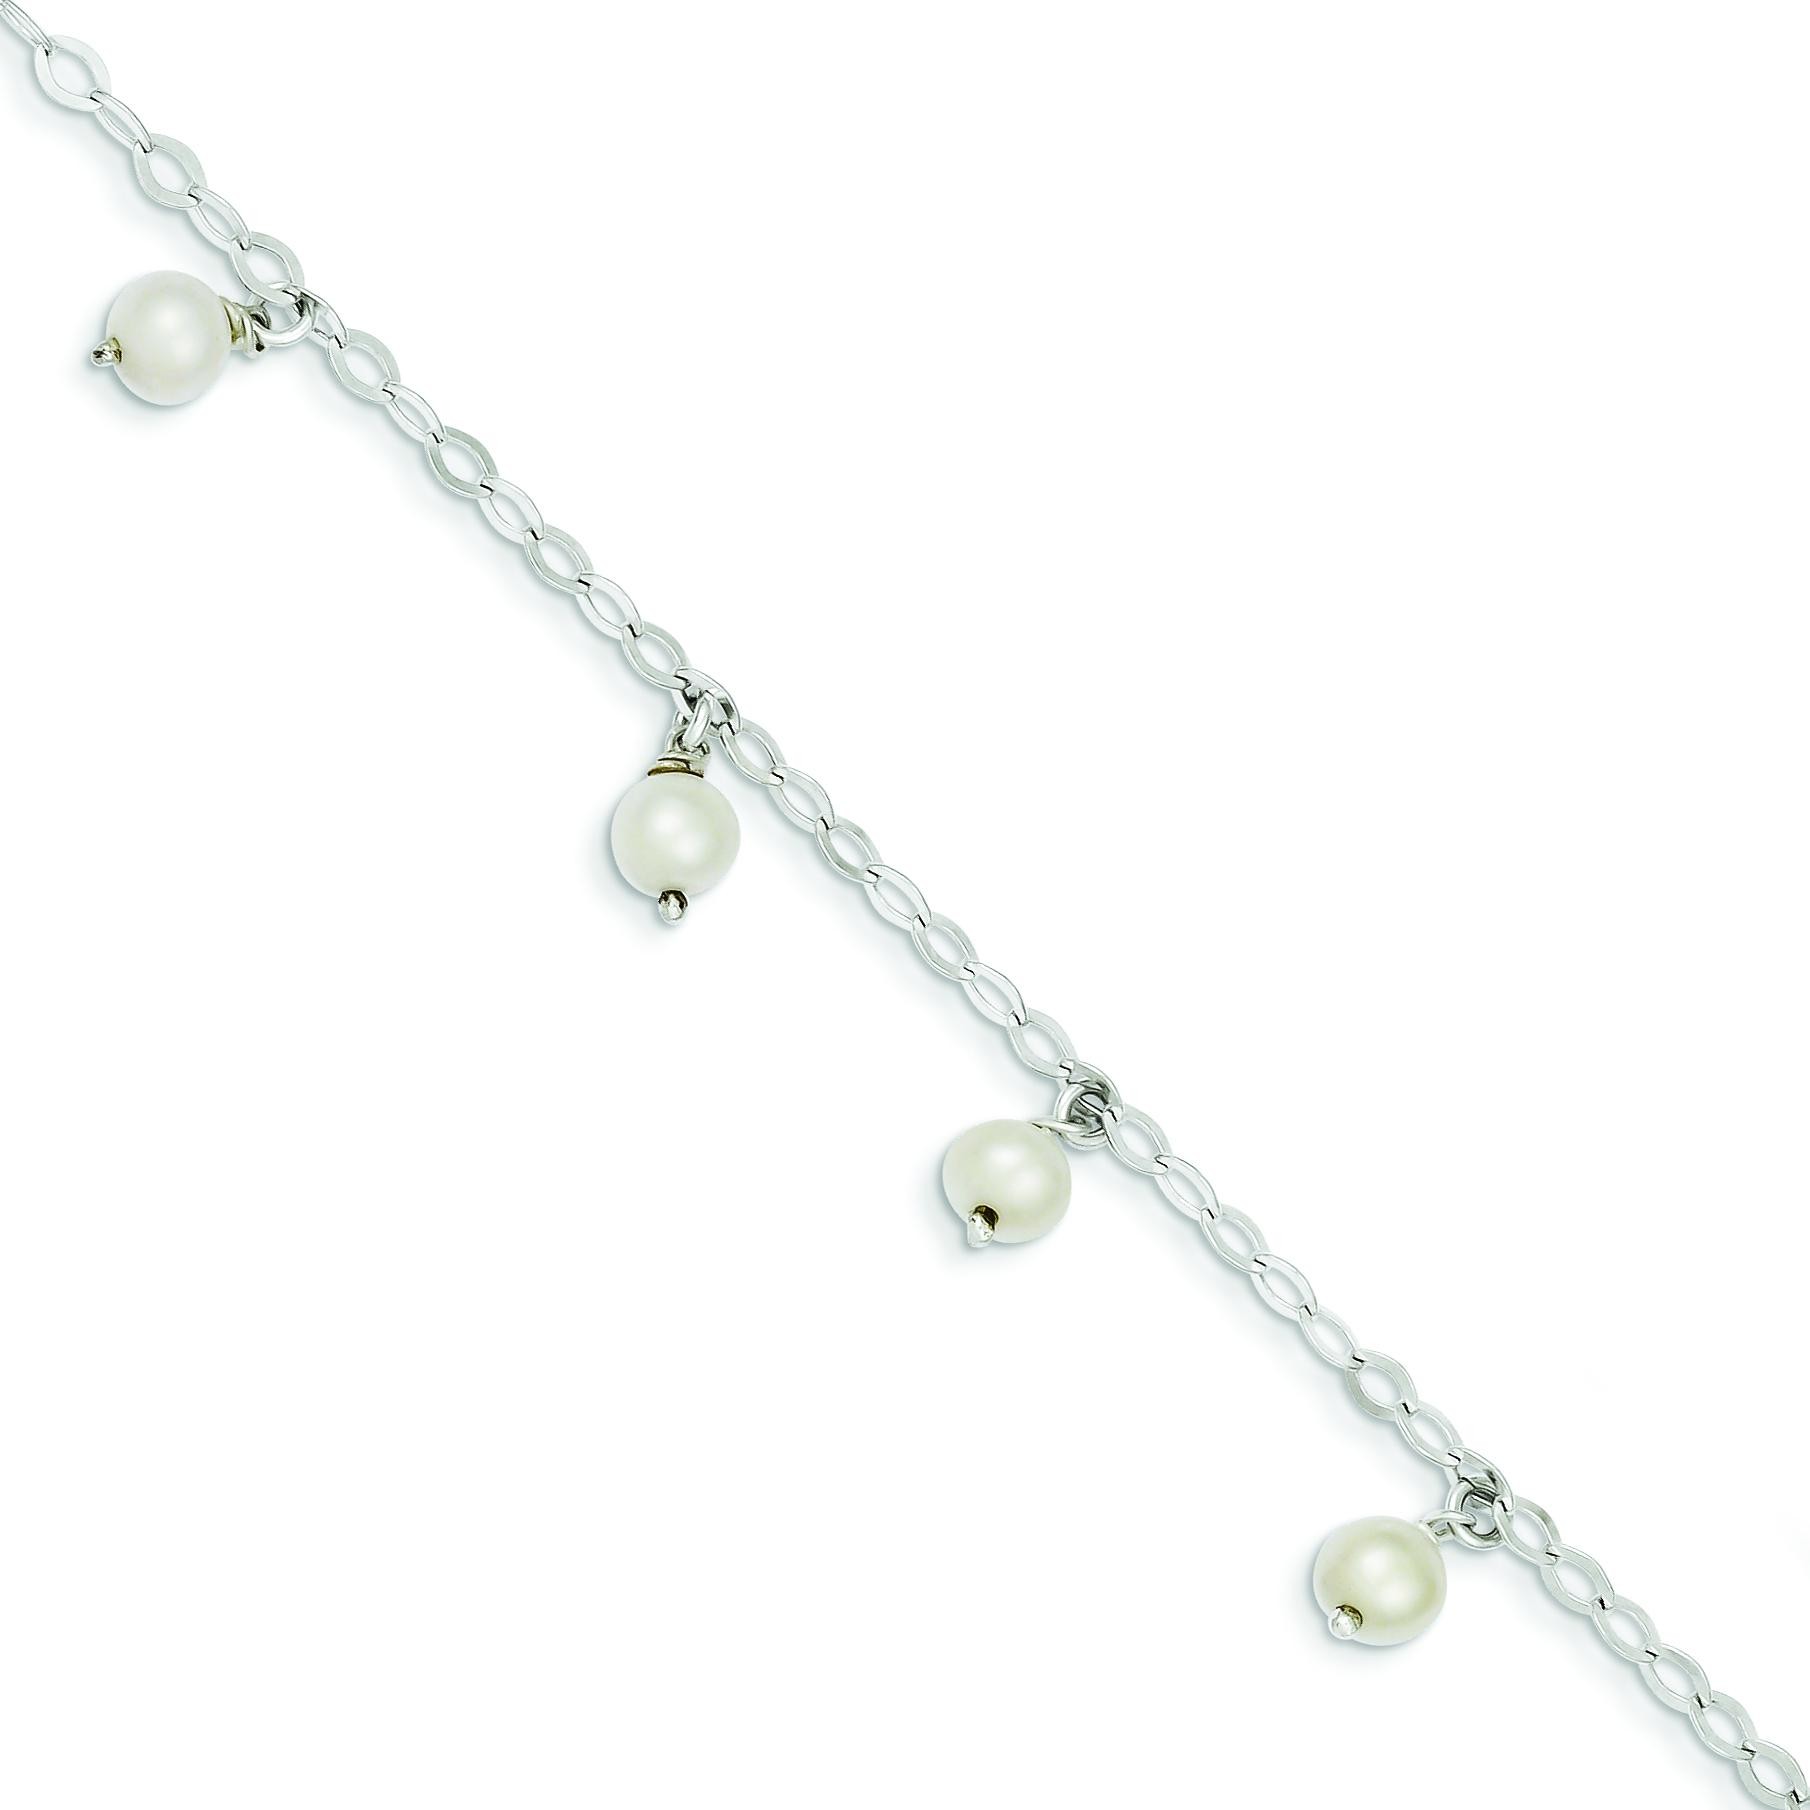 White Cultured Freshwater Pearl Bracelet in Sterling Silver